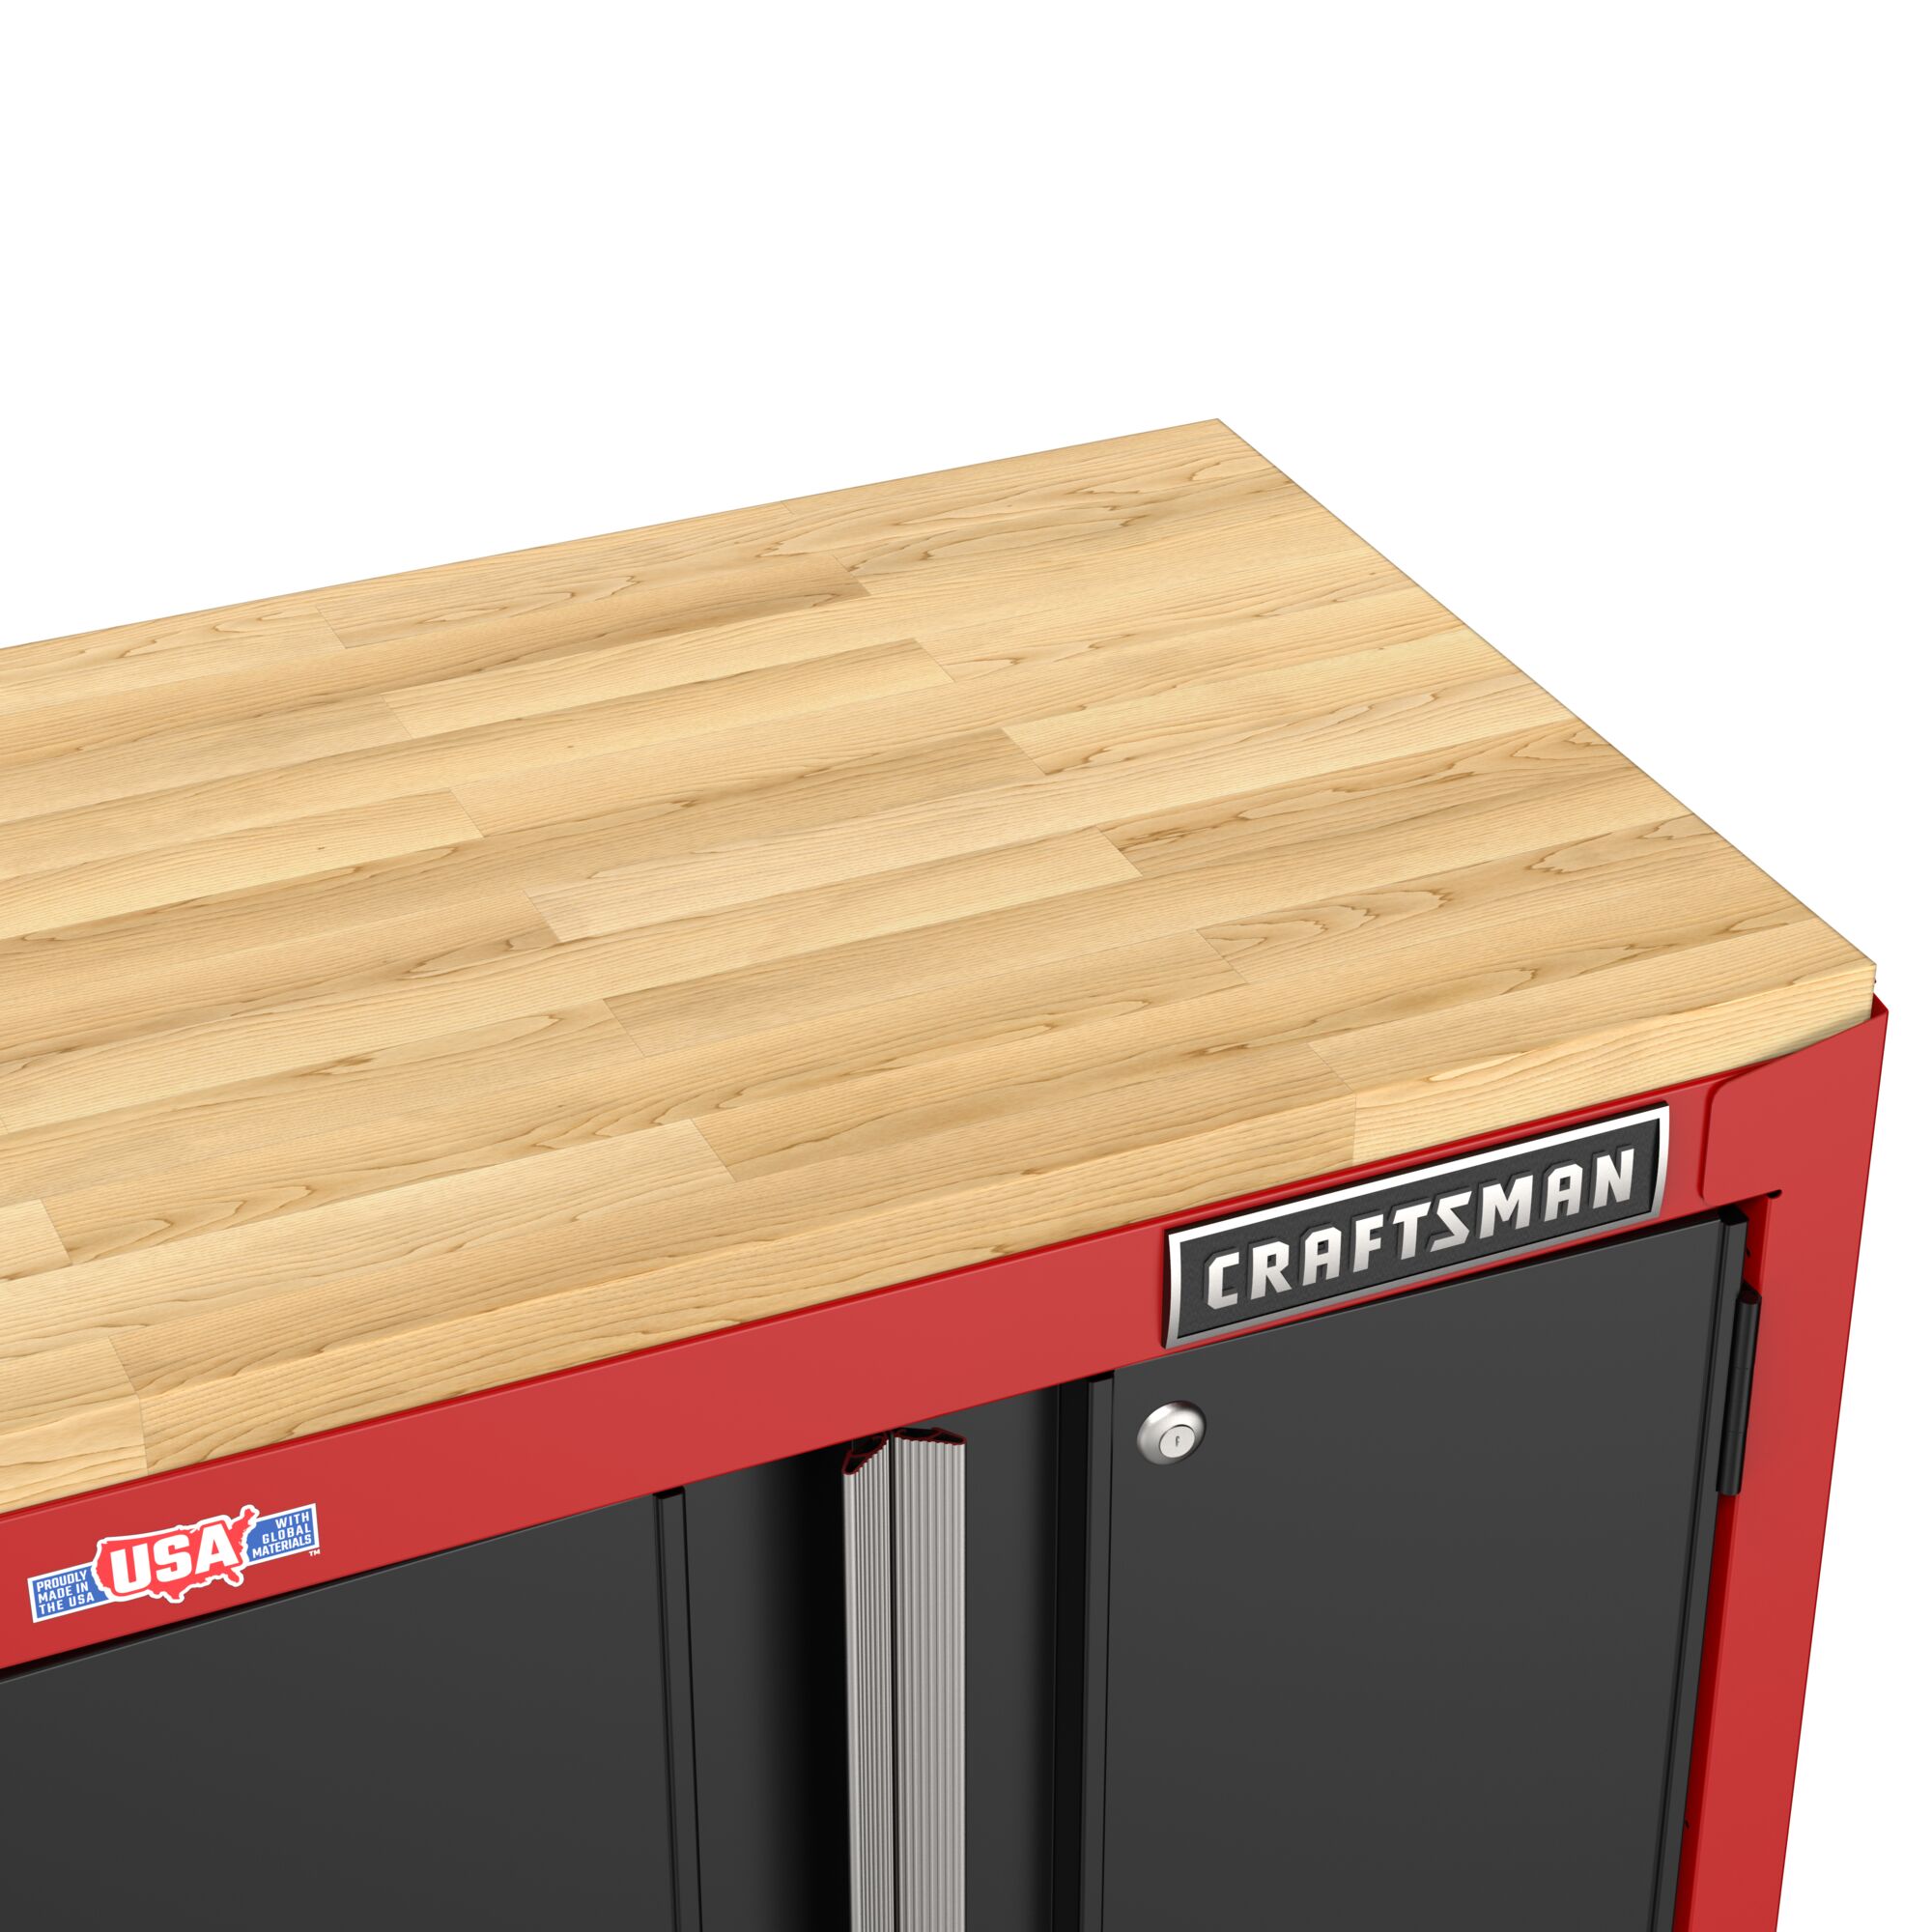 View of CRAFTSMAN Storage: Cabinets & Chests Stationary on white background